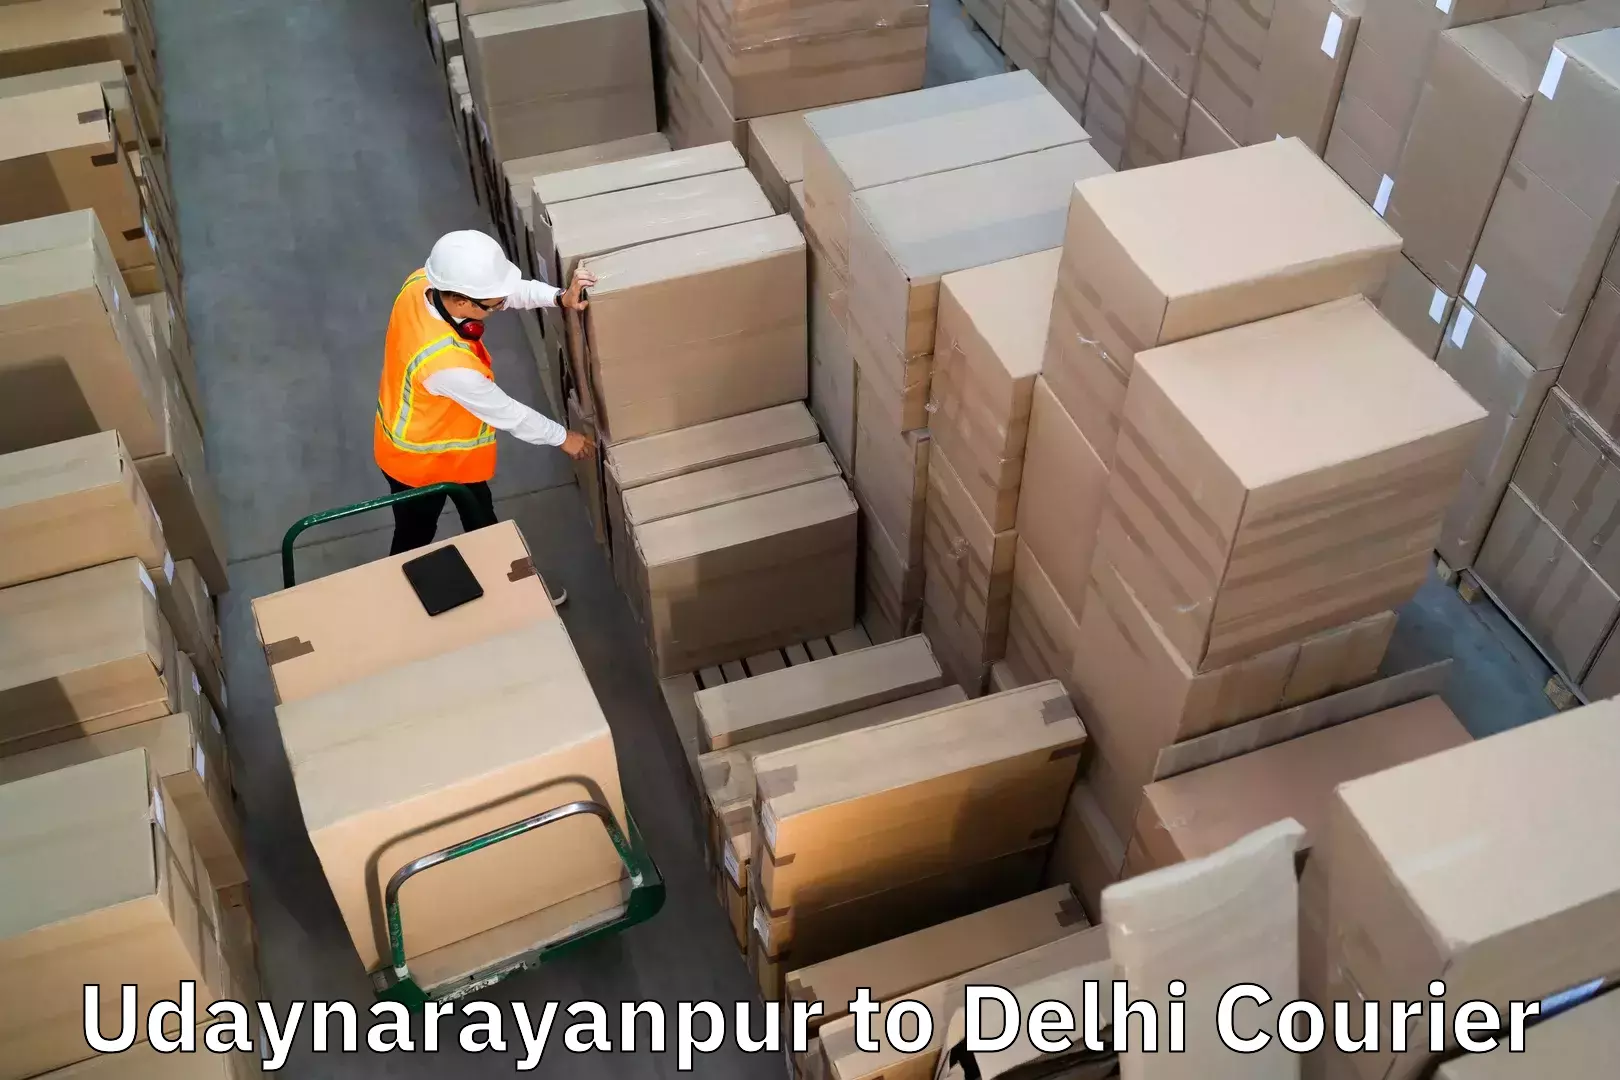 Luggage shipment specialists Udaynarayanpur to Lodhi Road